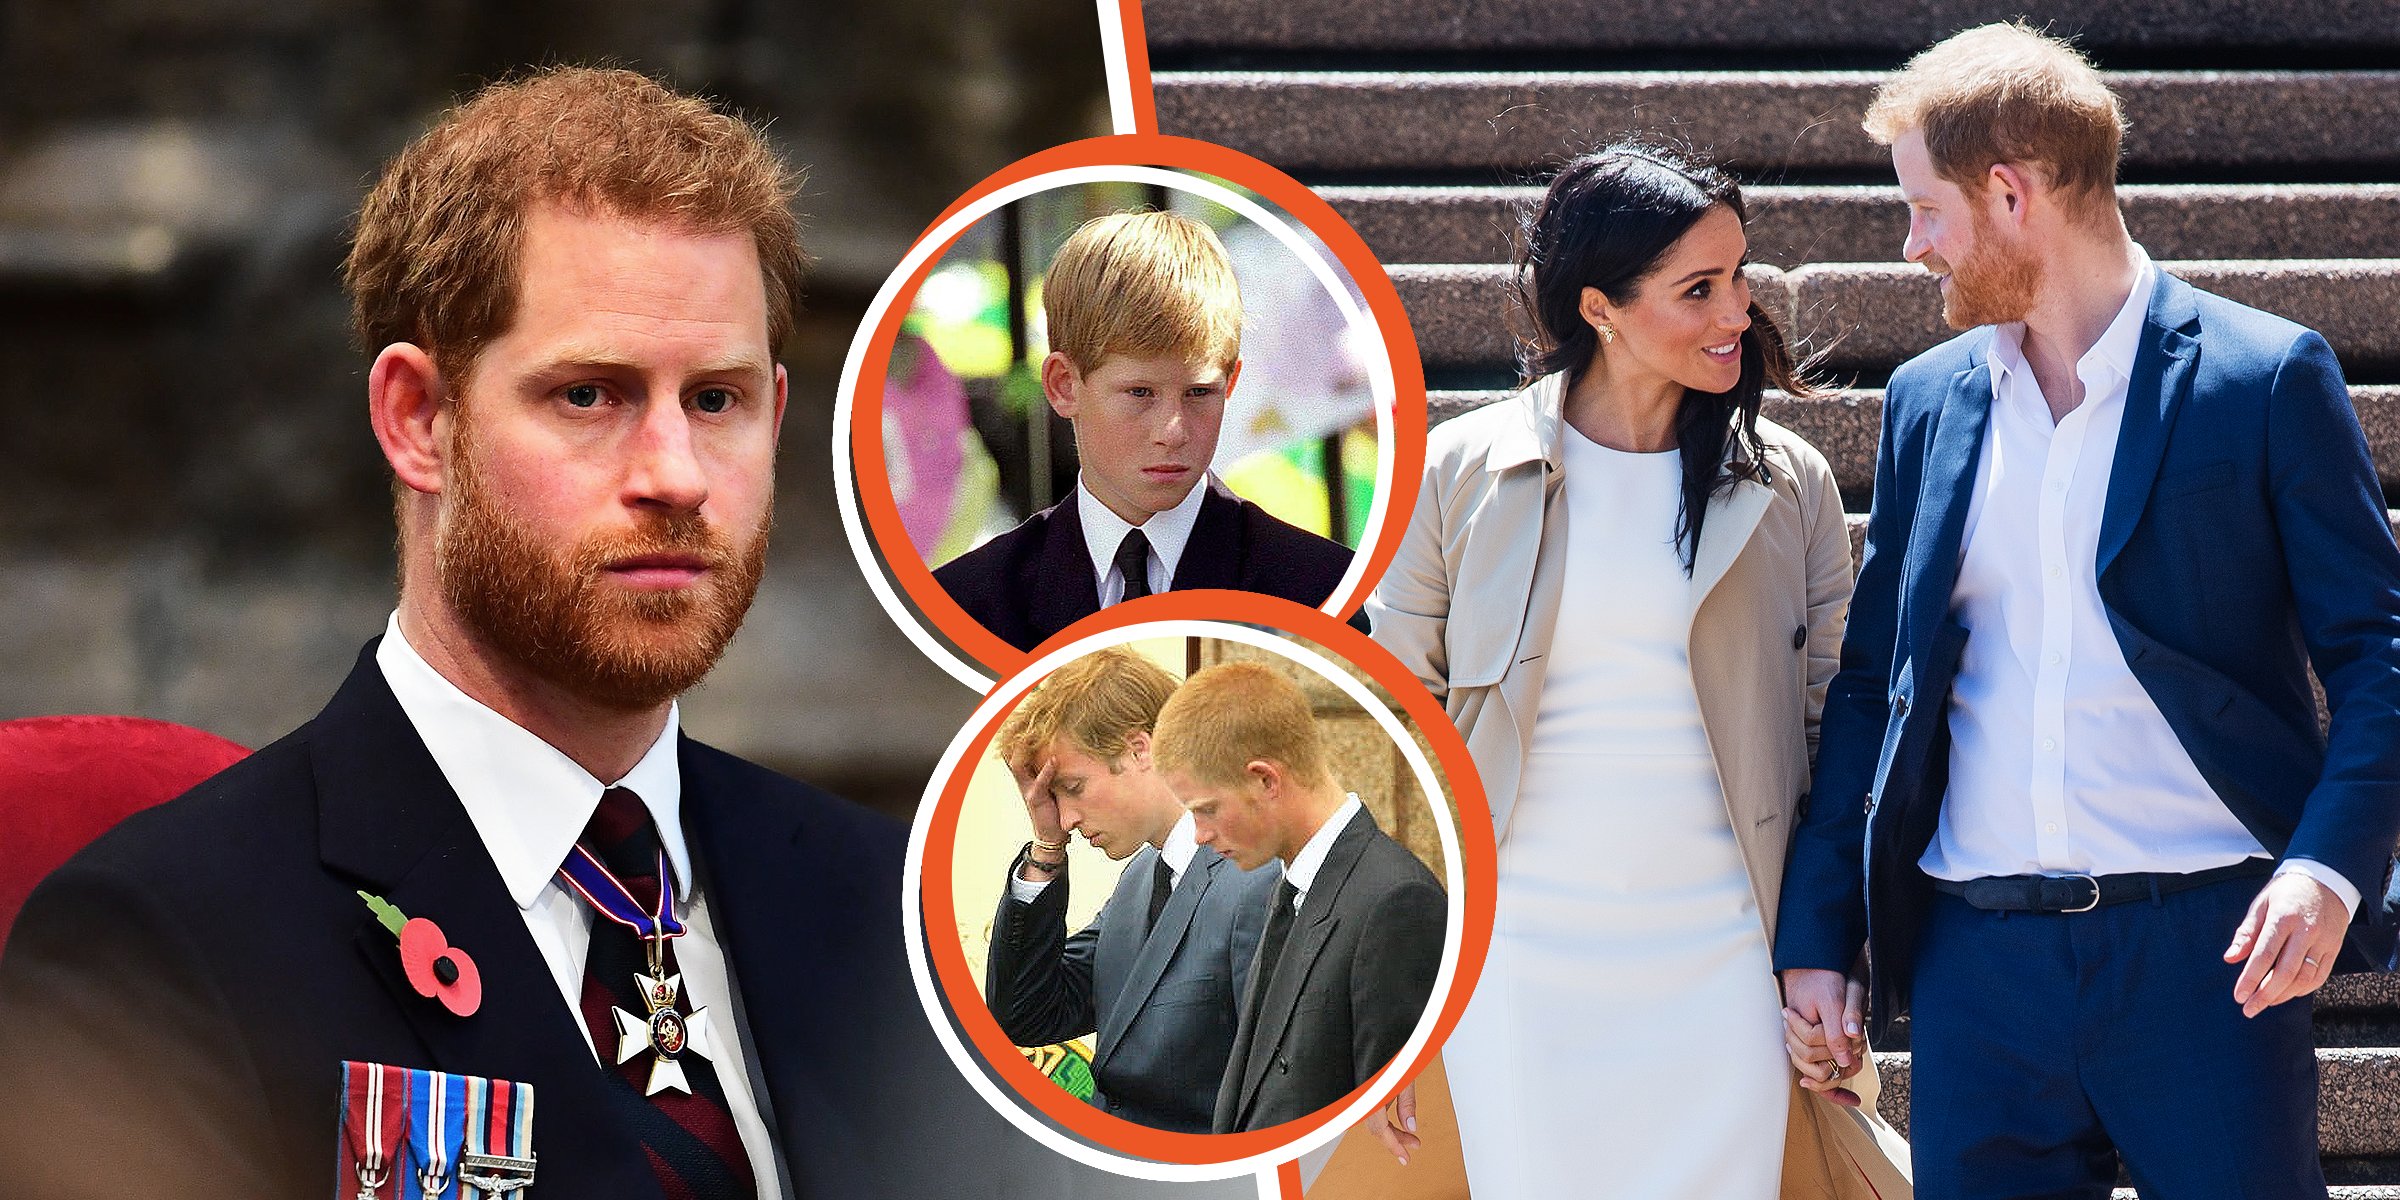 Prince Harry | Prince Harry | Prince William and Prince Harry | Prince Harry and Meghan Markle, Duchess of Sussex | Source: Getty Images